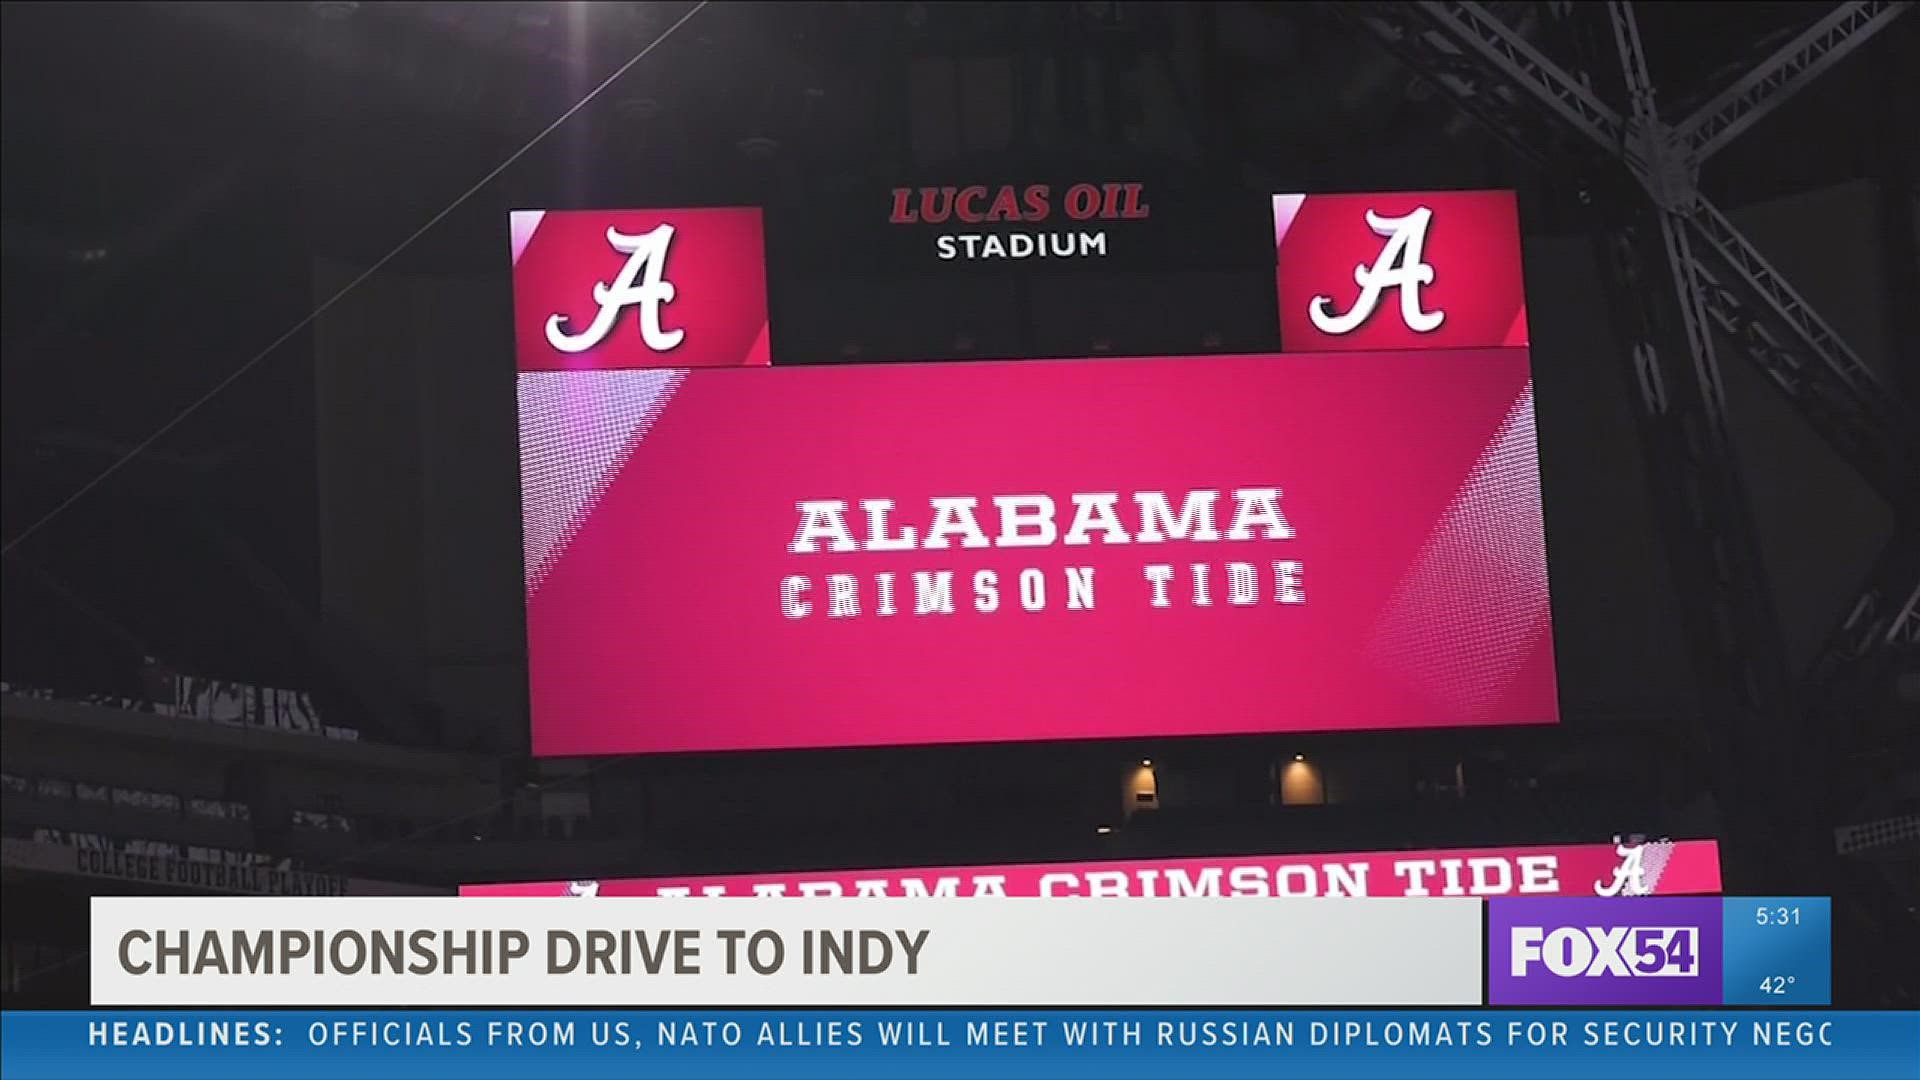 Mo Carter and Naomi Grey are LIVE in Indianapolis awaiting the start of the Alabama-Georgia match-up.